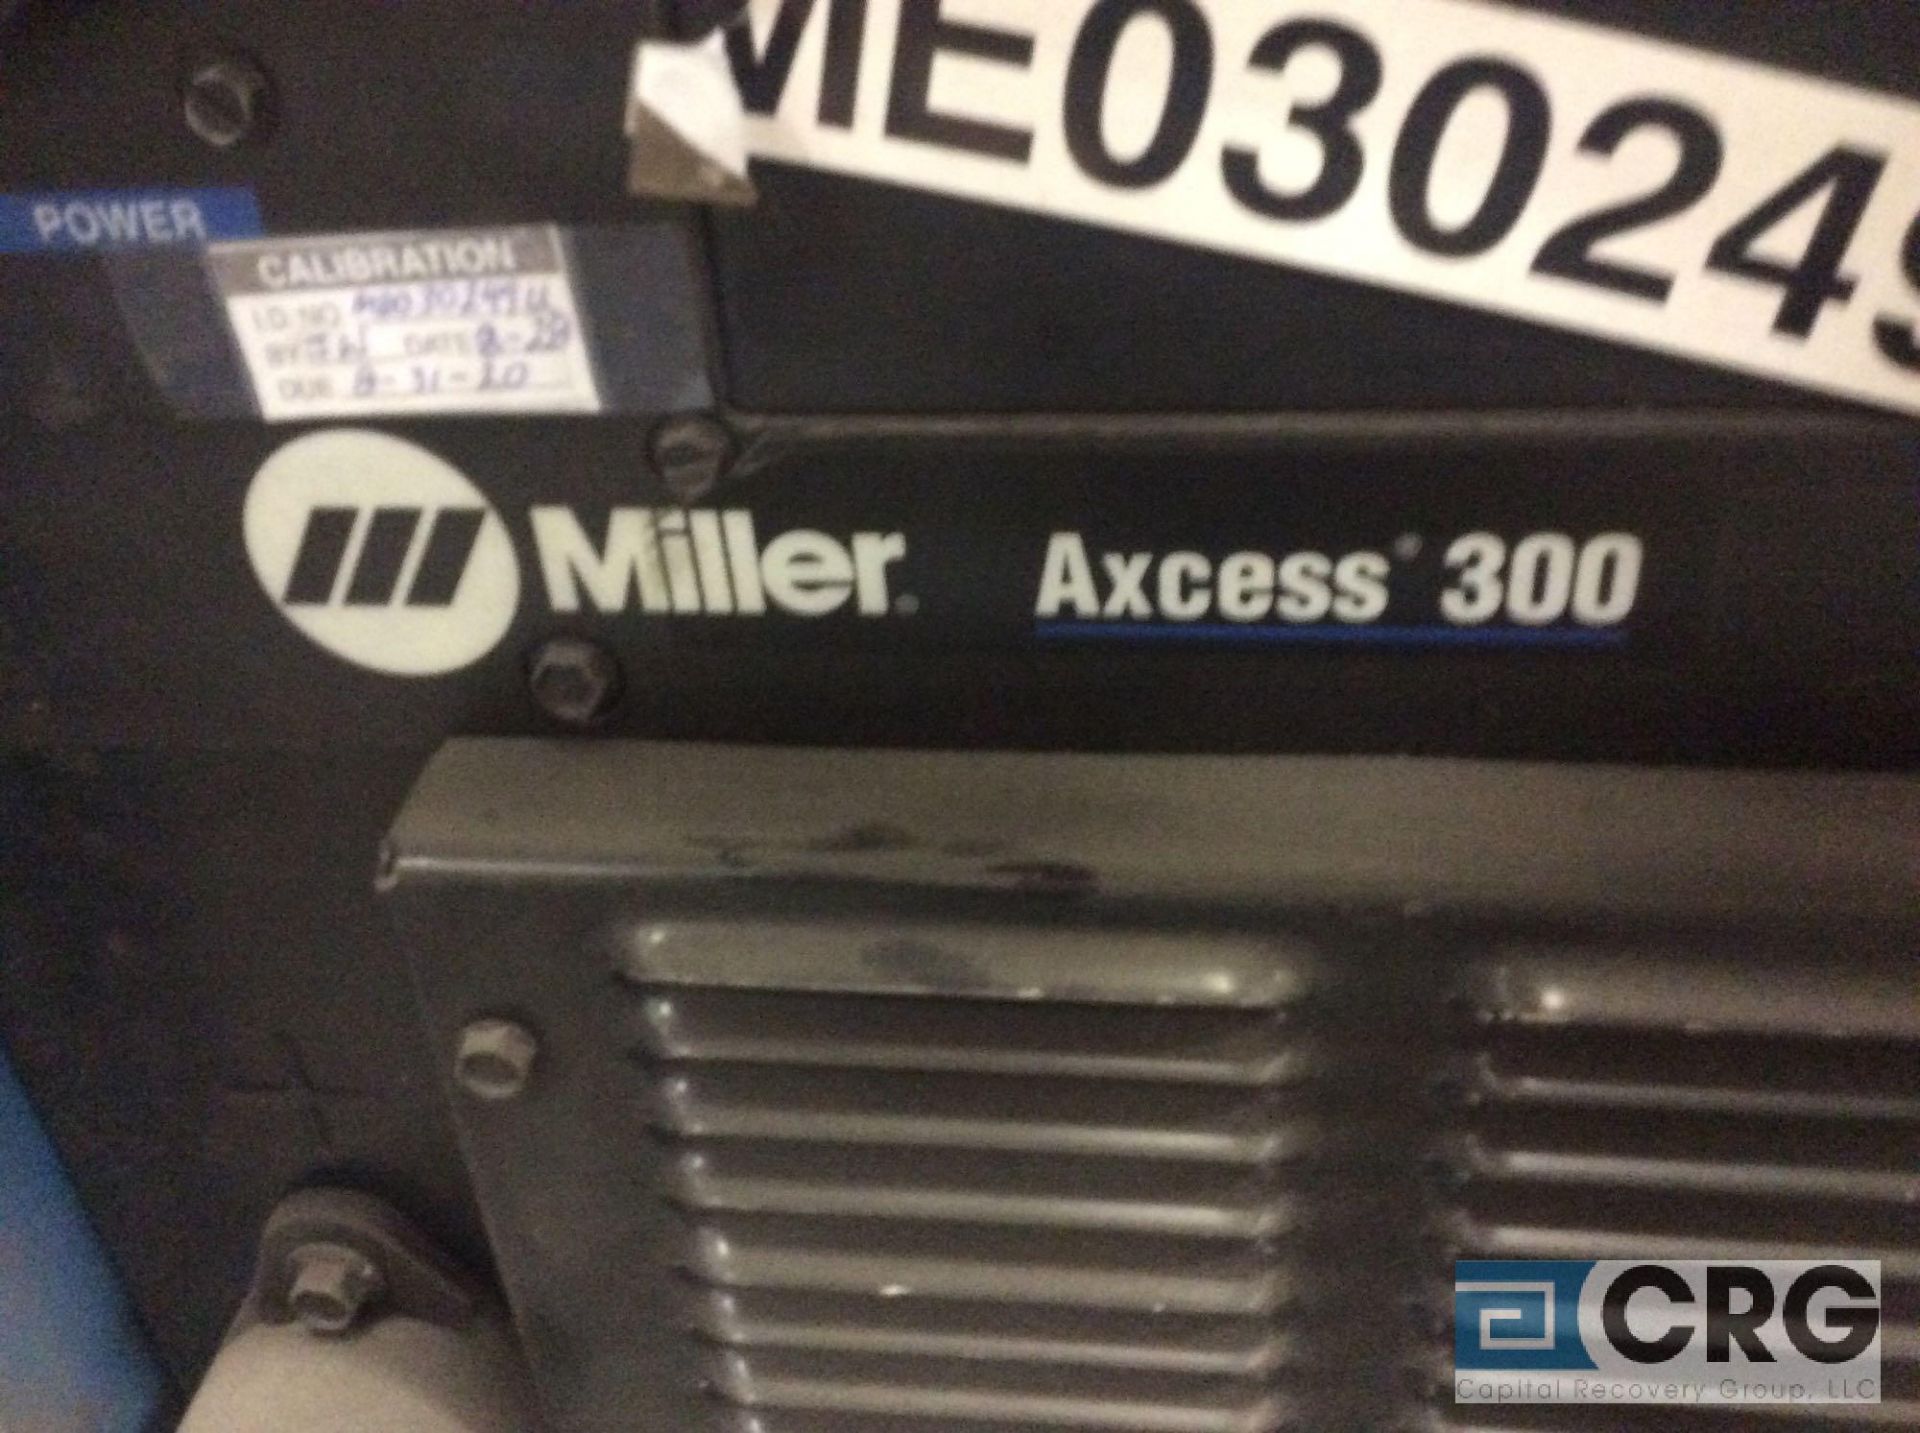 Miller AXCESS 300 welder, 3 phase With wire feed - Image 2 of 3